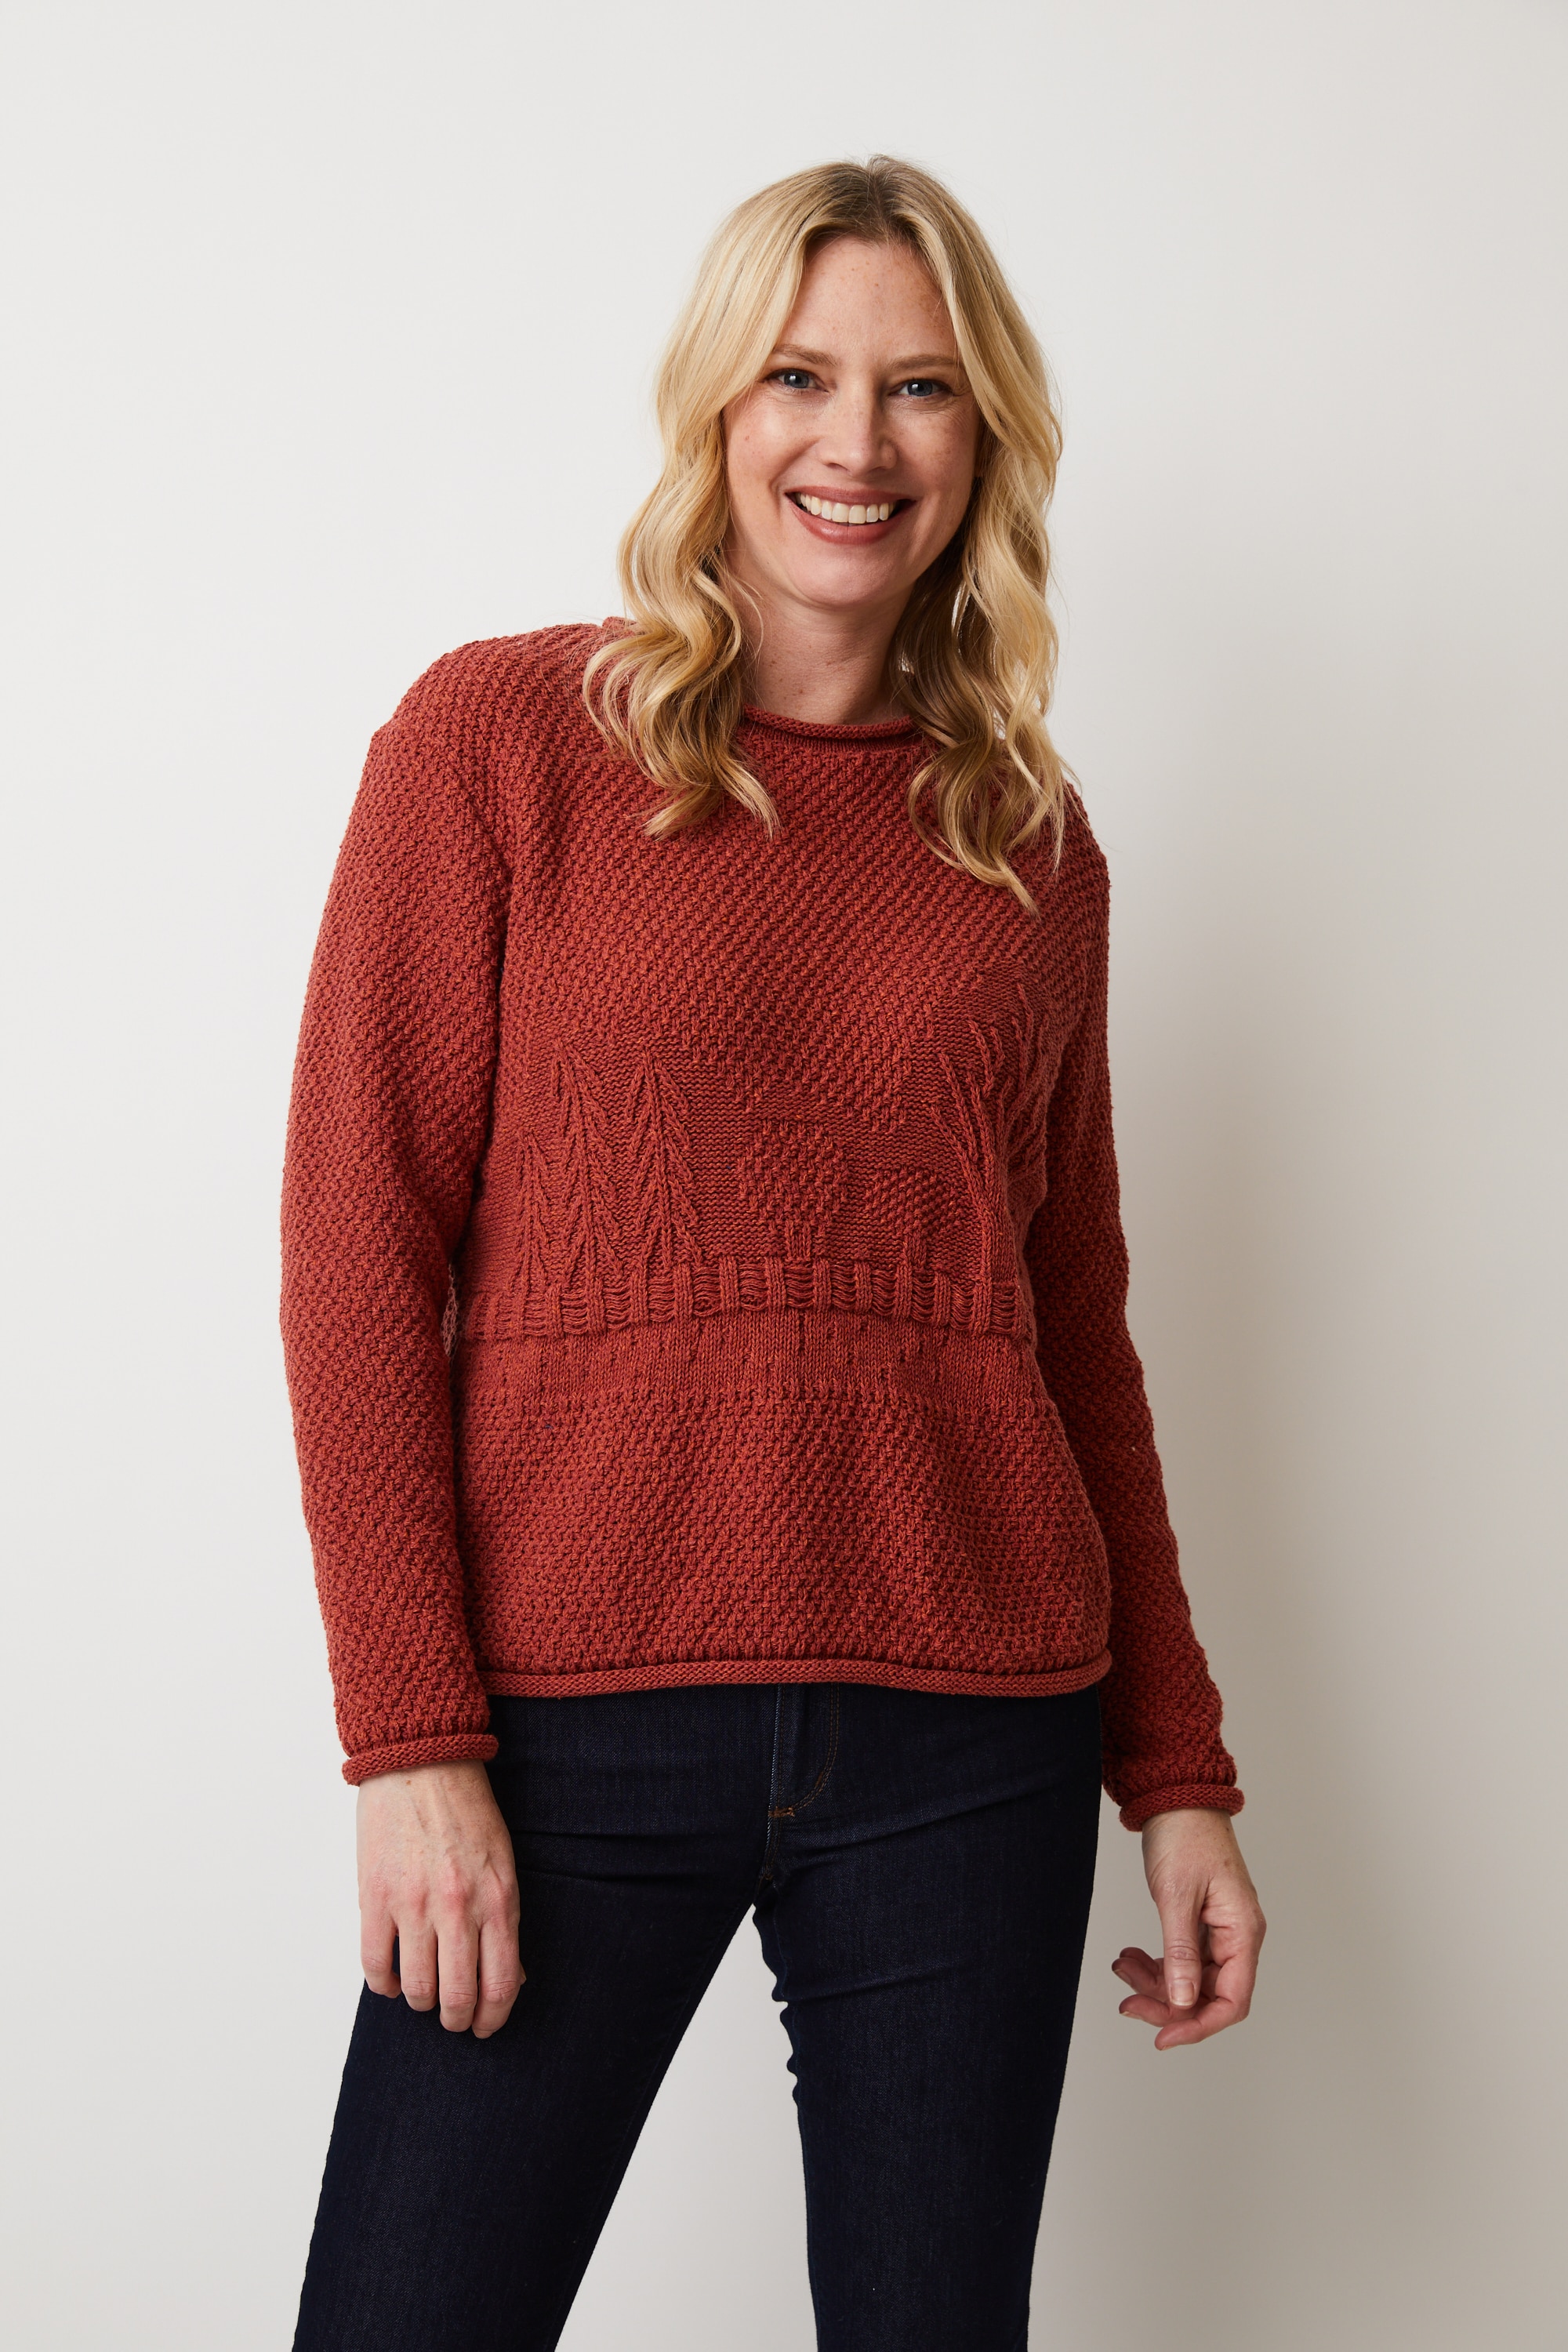 Cotton Country By Parkhurst Linden Textured Scene Sweater